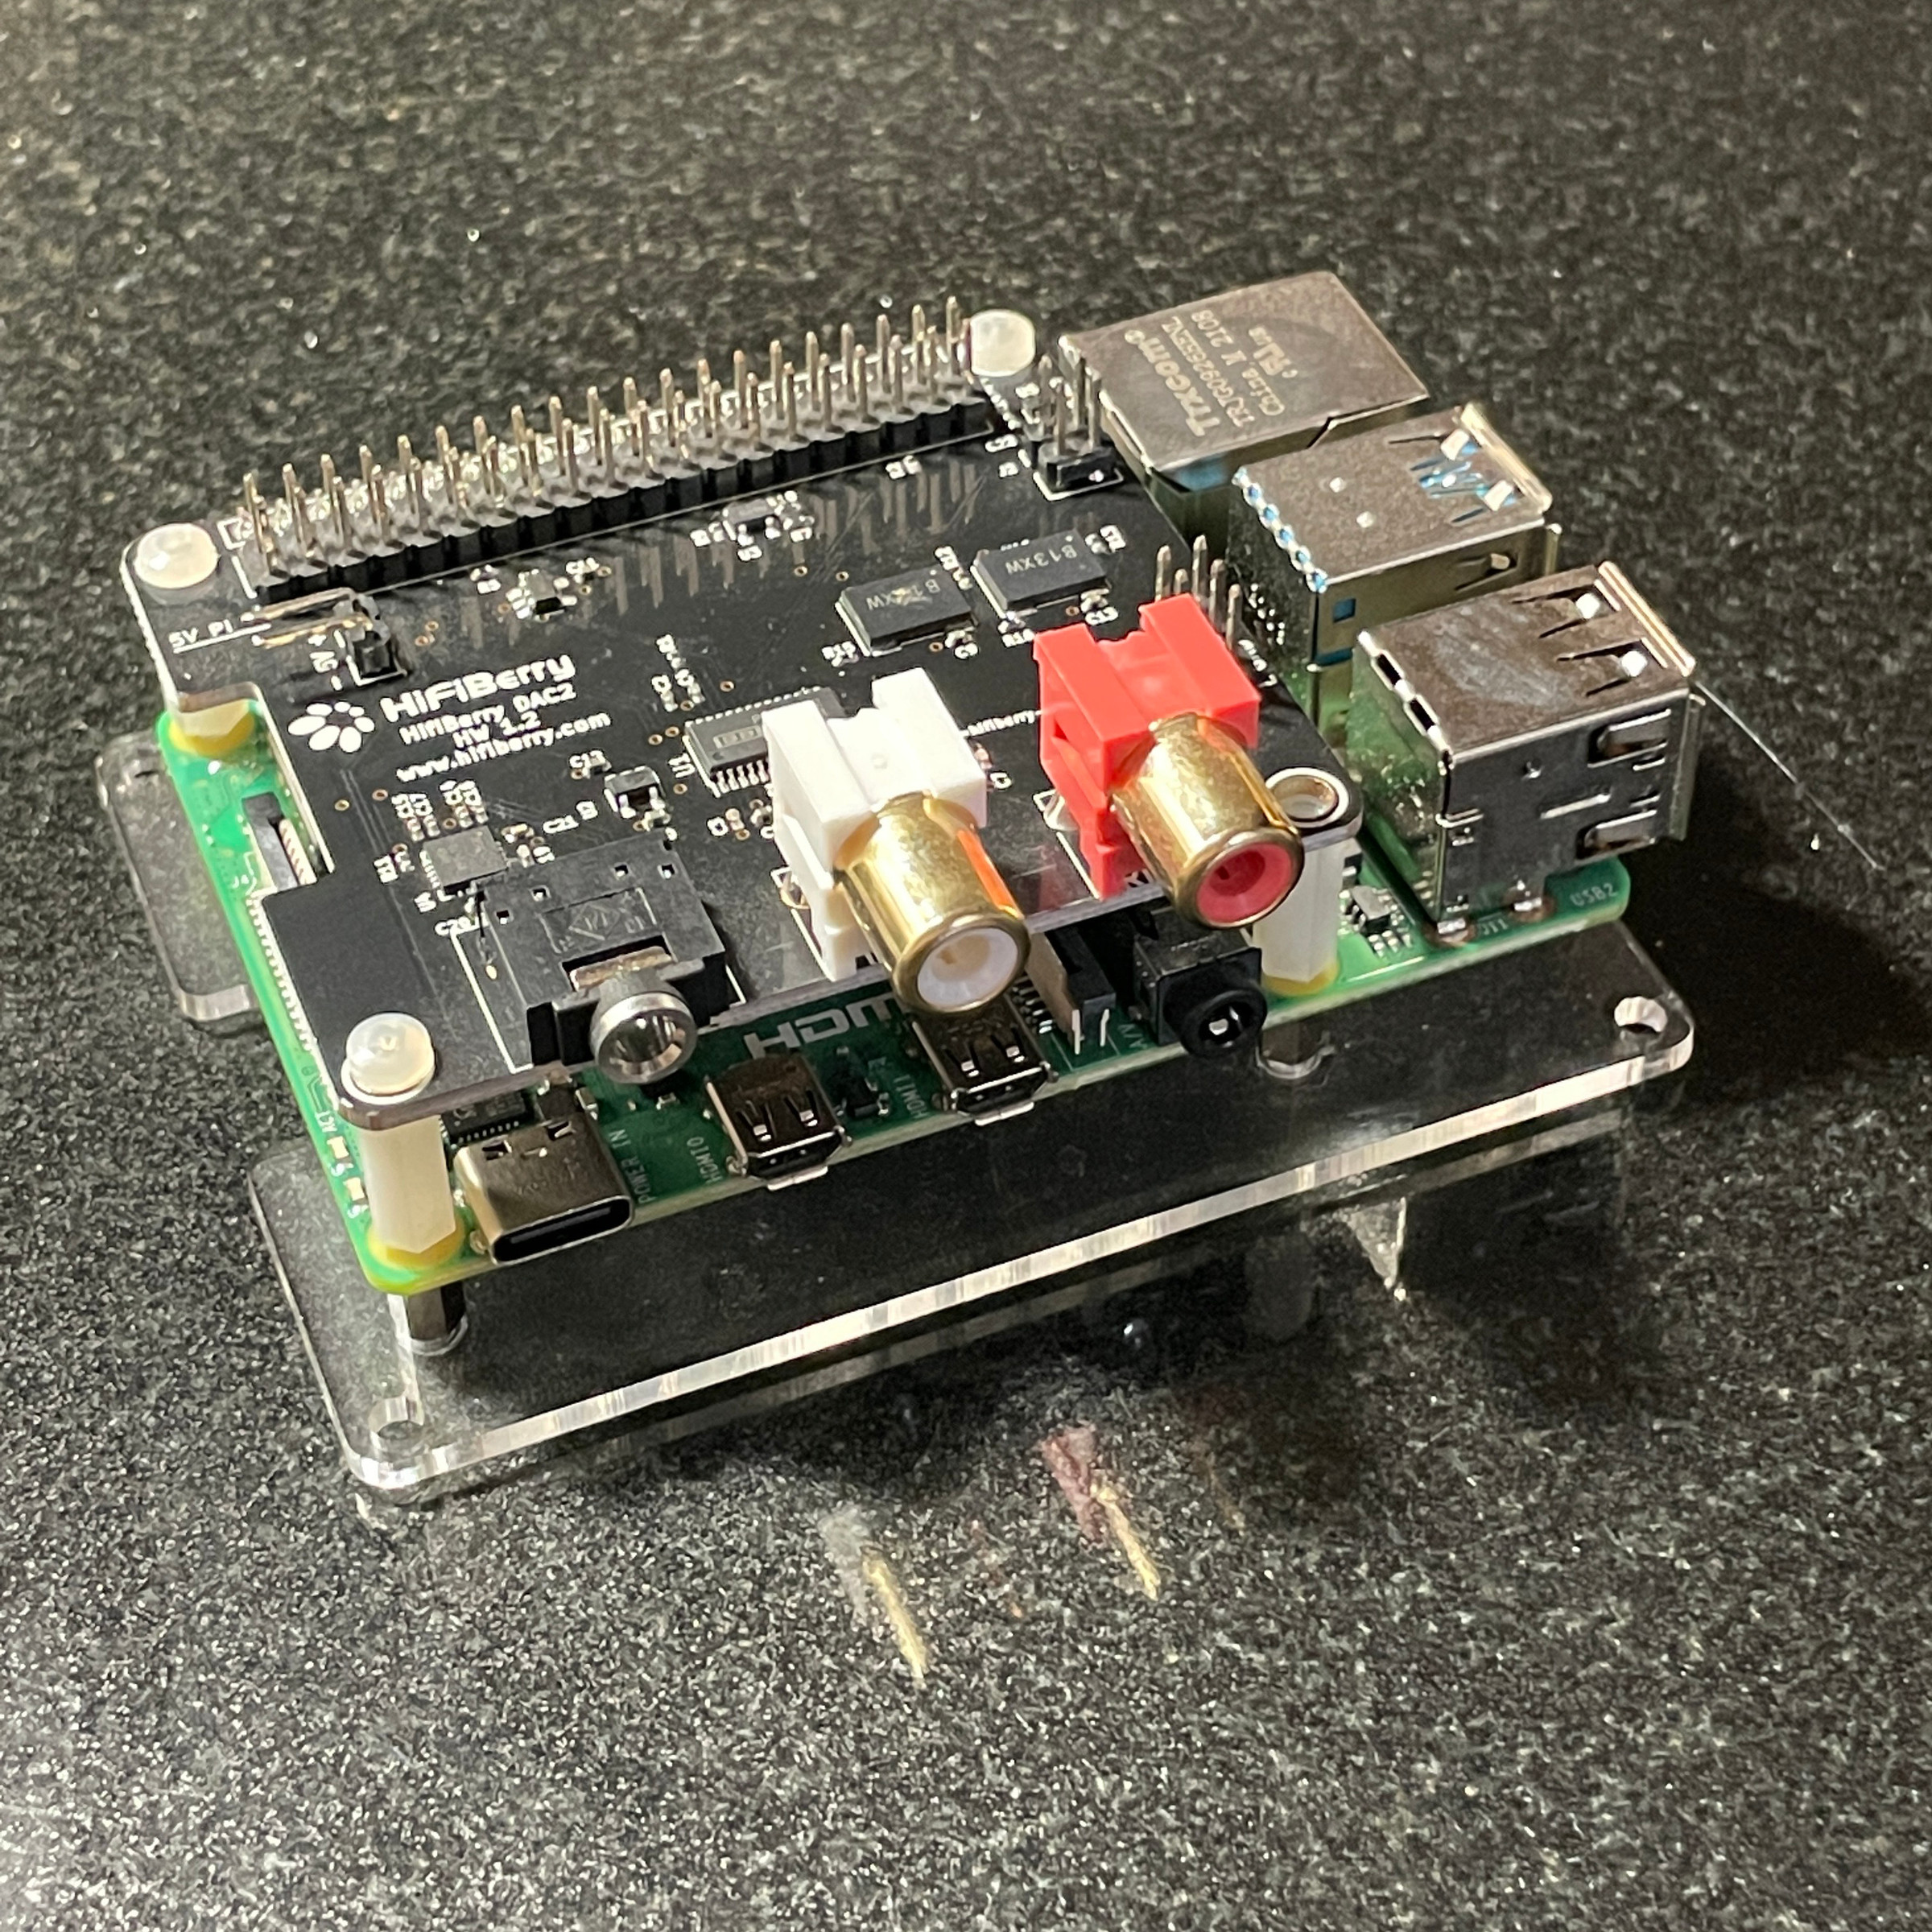 A photo of a caseless Raspberry Pi 4b with a HifiBerry DAC hat on top.